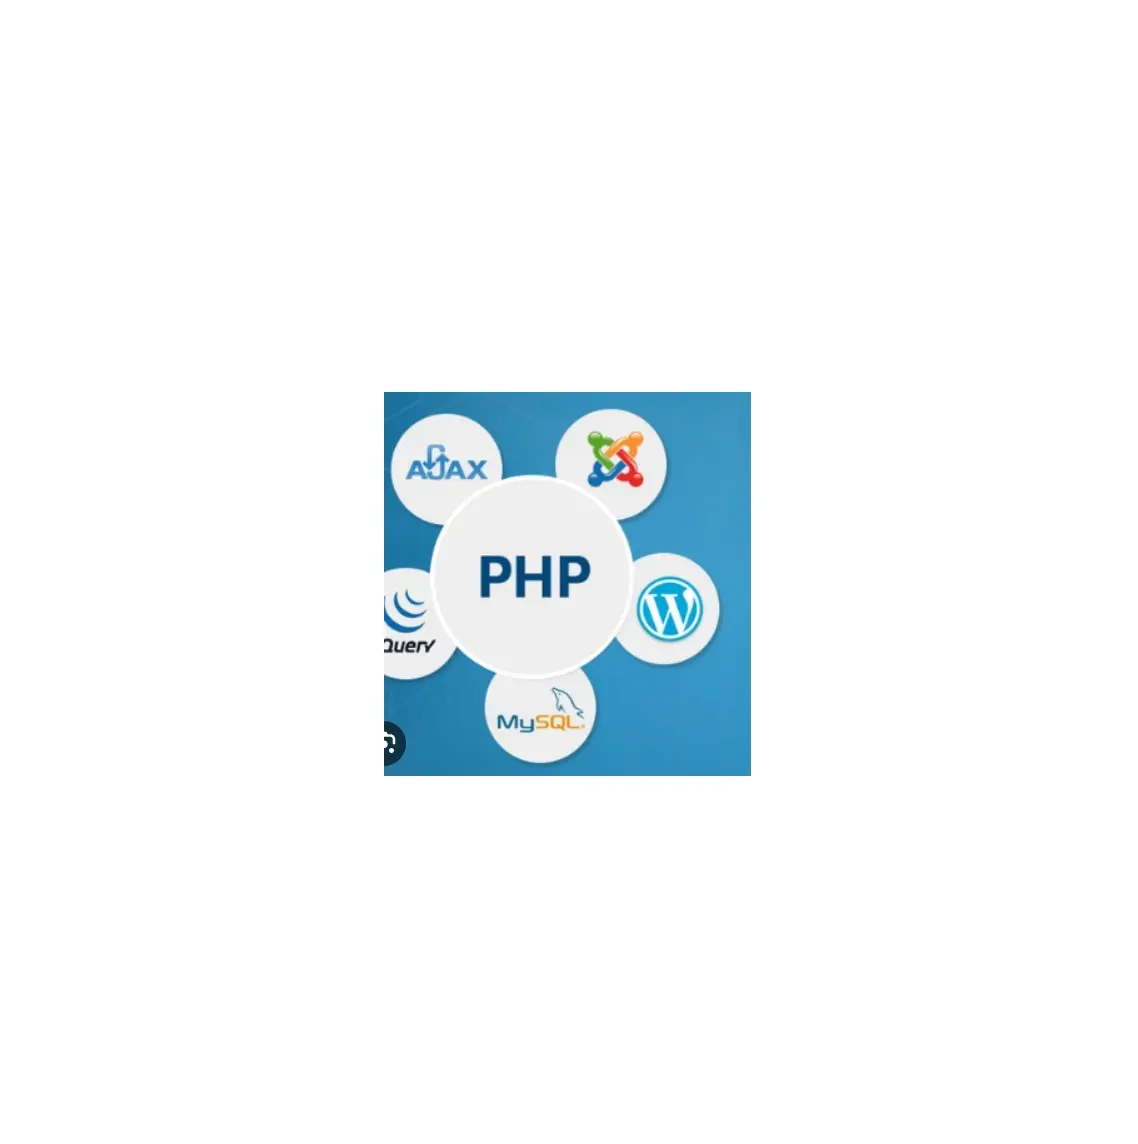 Professional Website Designing Services PHP Java HTML Linux Windows Web Development from Indian Exporter